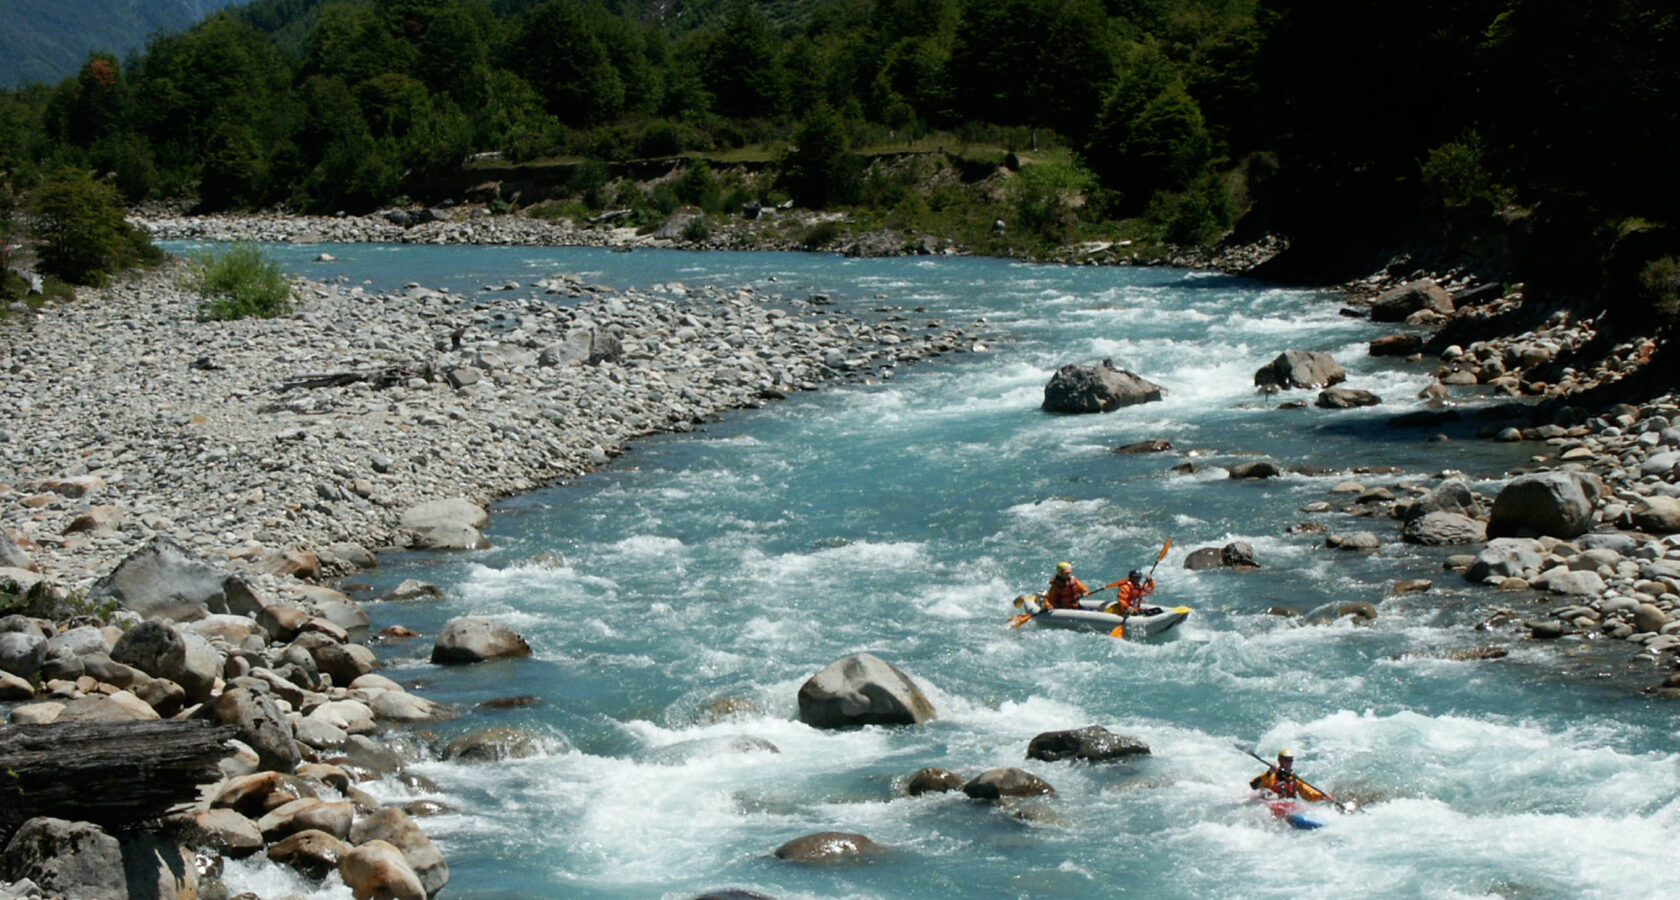 Whitewater rafting the Futaleufú River in Chile.